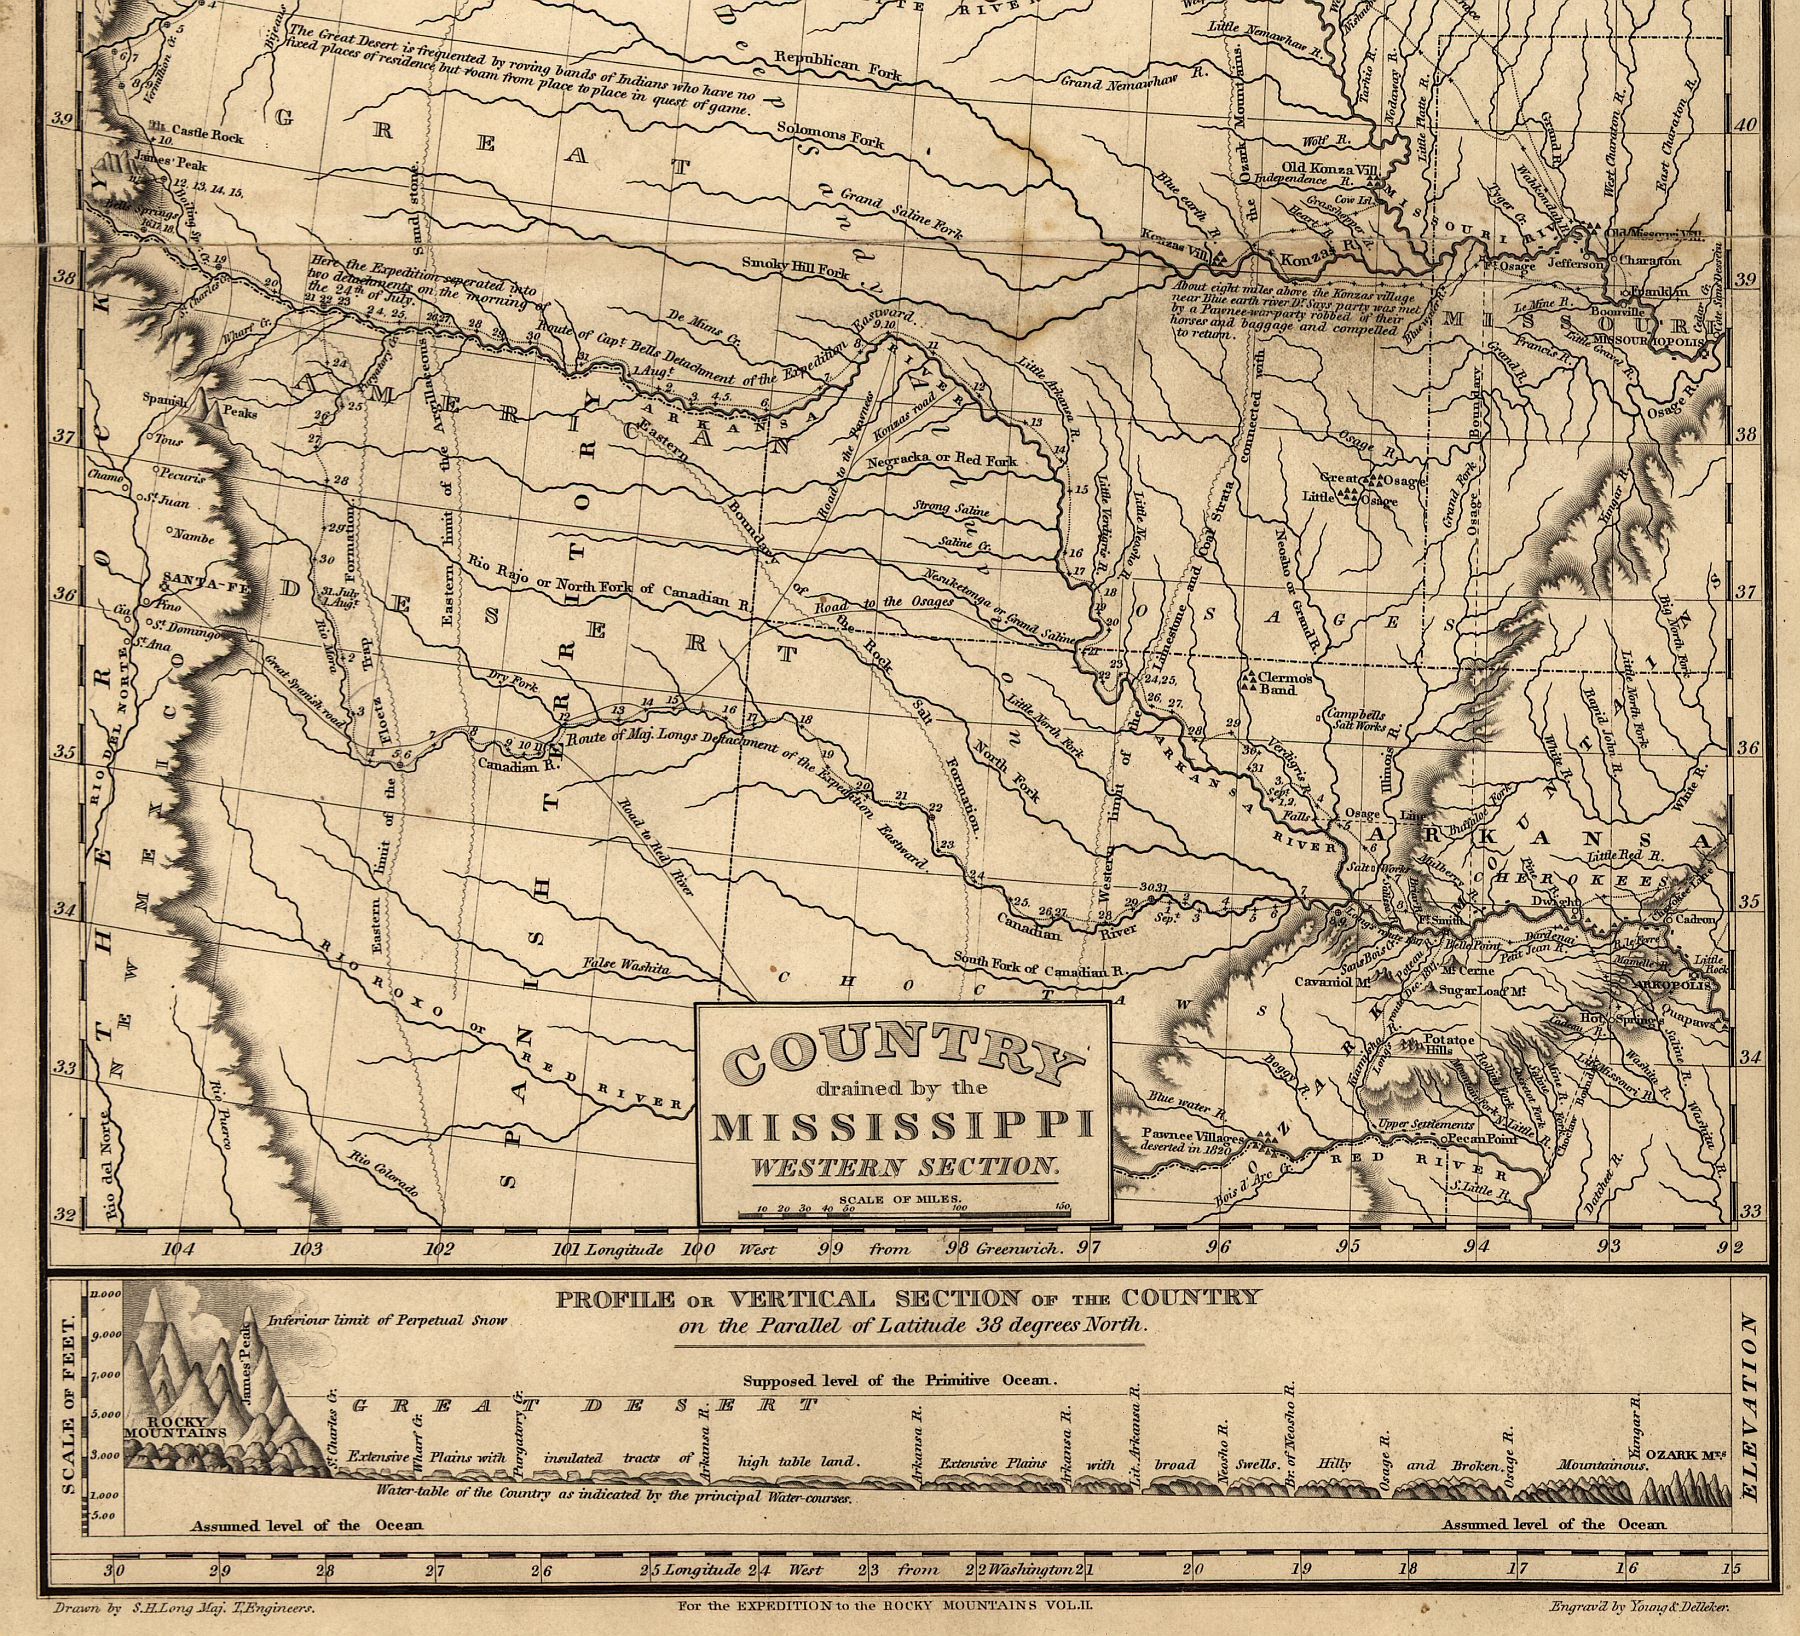 Country Drained by the Mississippi, by S. H. Long